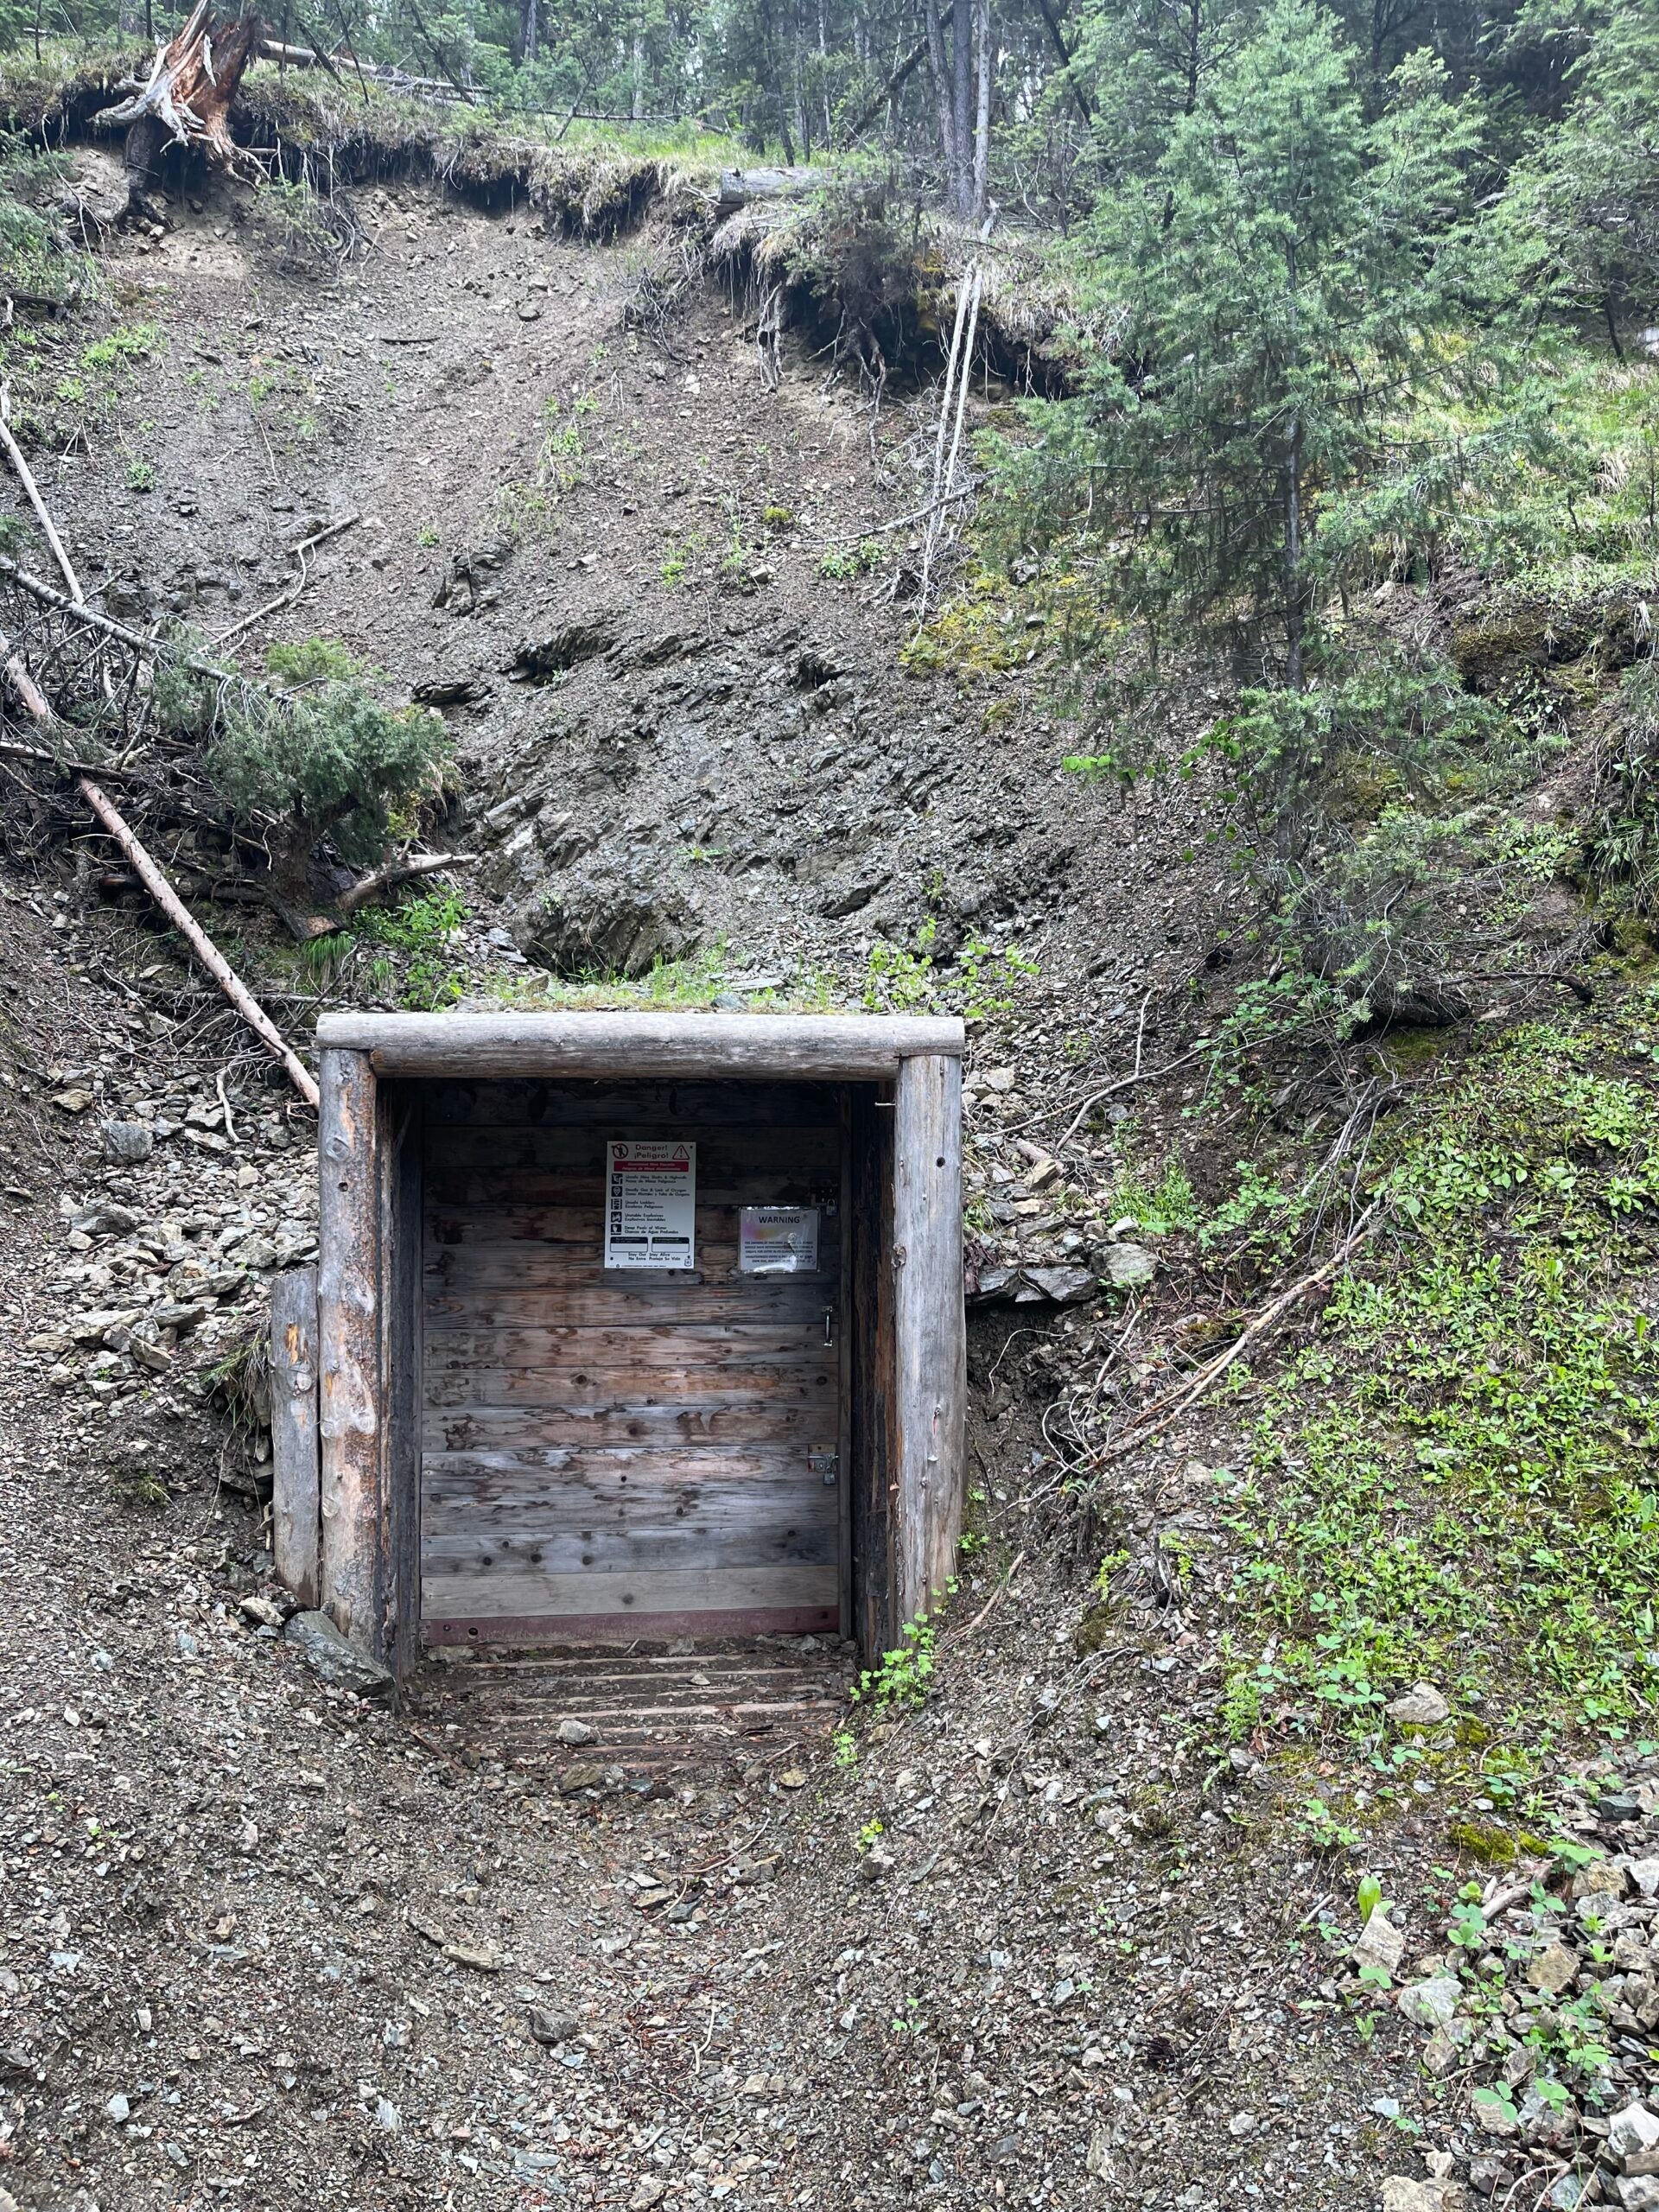 A decommissioned mine adit in the Sheep Creek area of the Bitterroot National Forest.